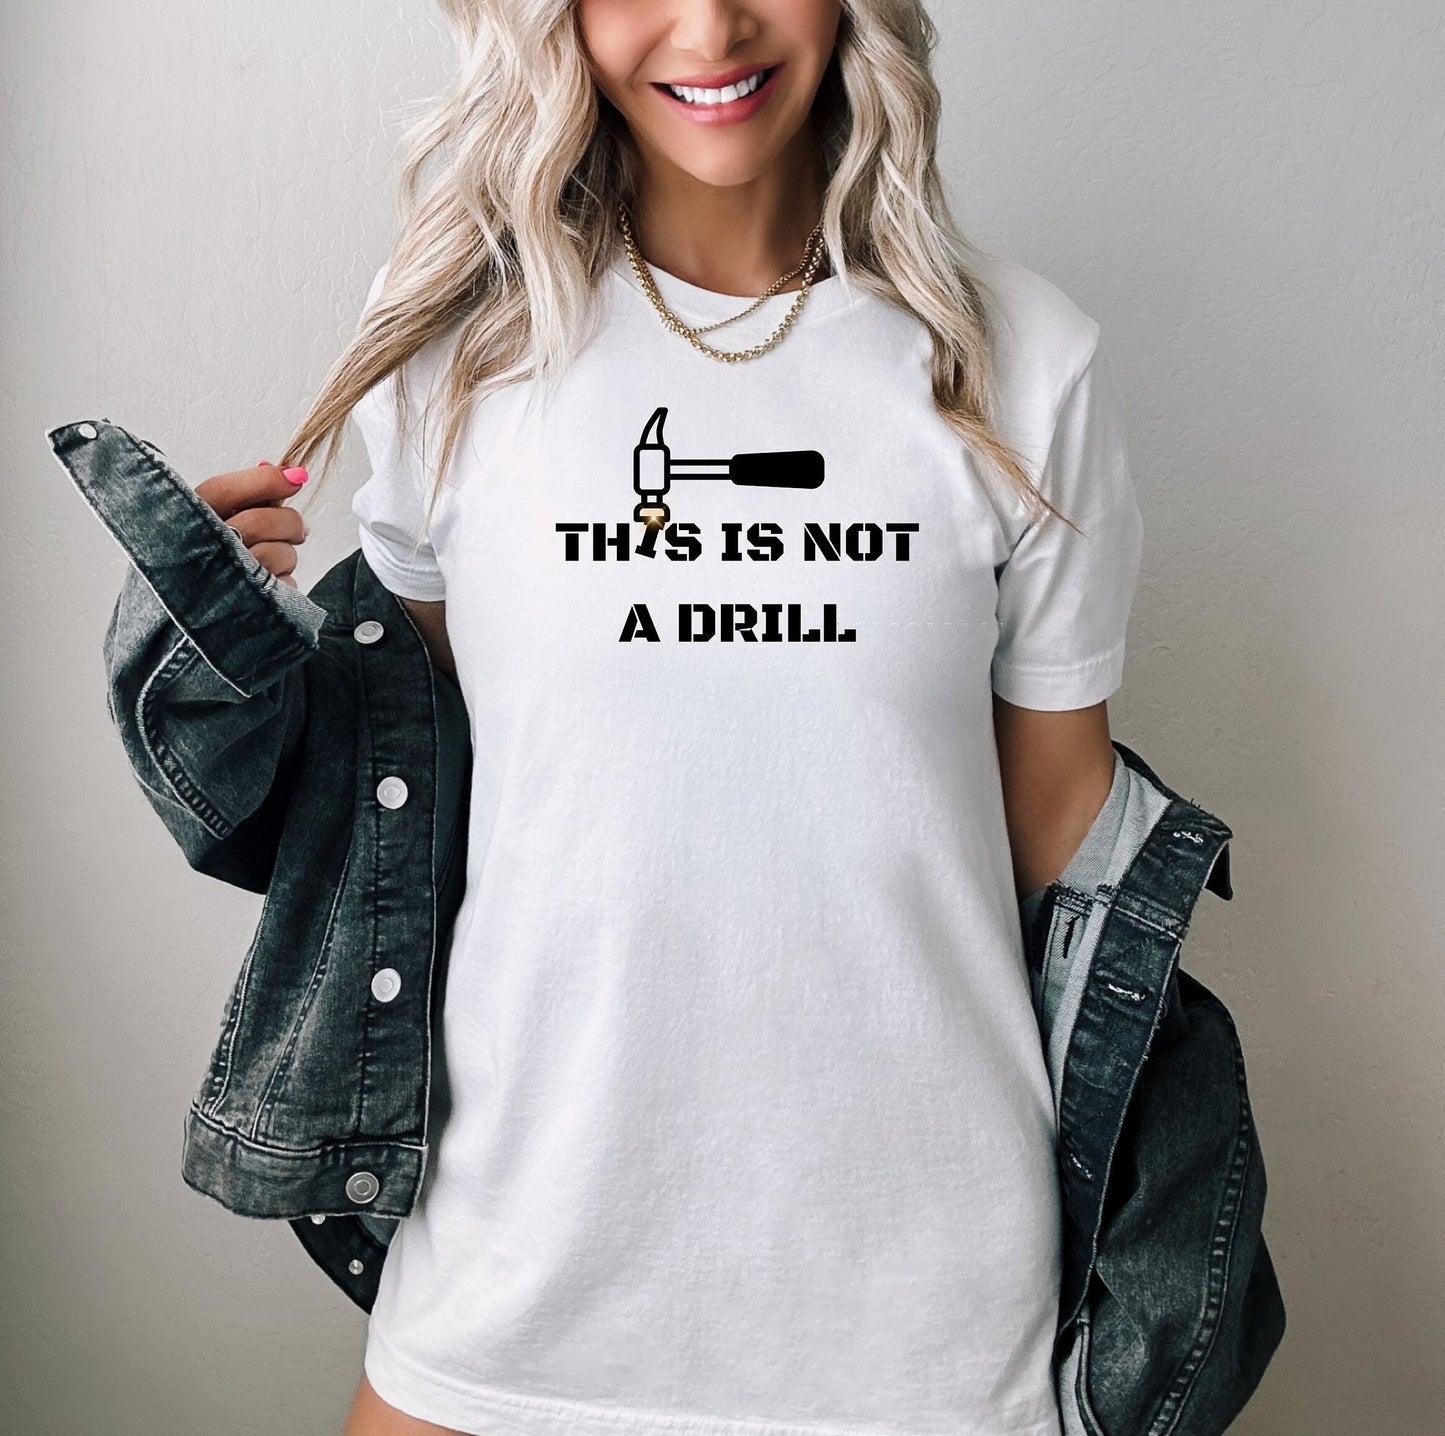 Humor Carpenter Tee, Shirt For Dad, Funny Dad Shirt, This Is Not A Drill Shirt, Funny Hammer Shirt, Handyman Hammer Shirt, Funny Joke Shirt